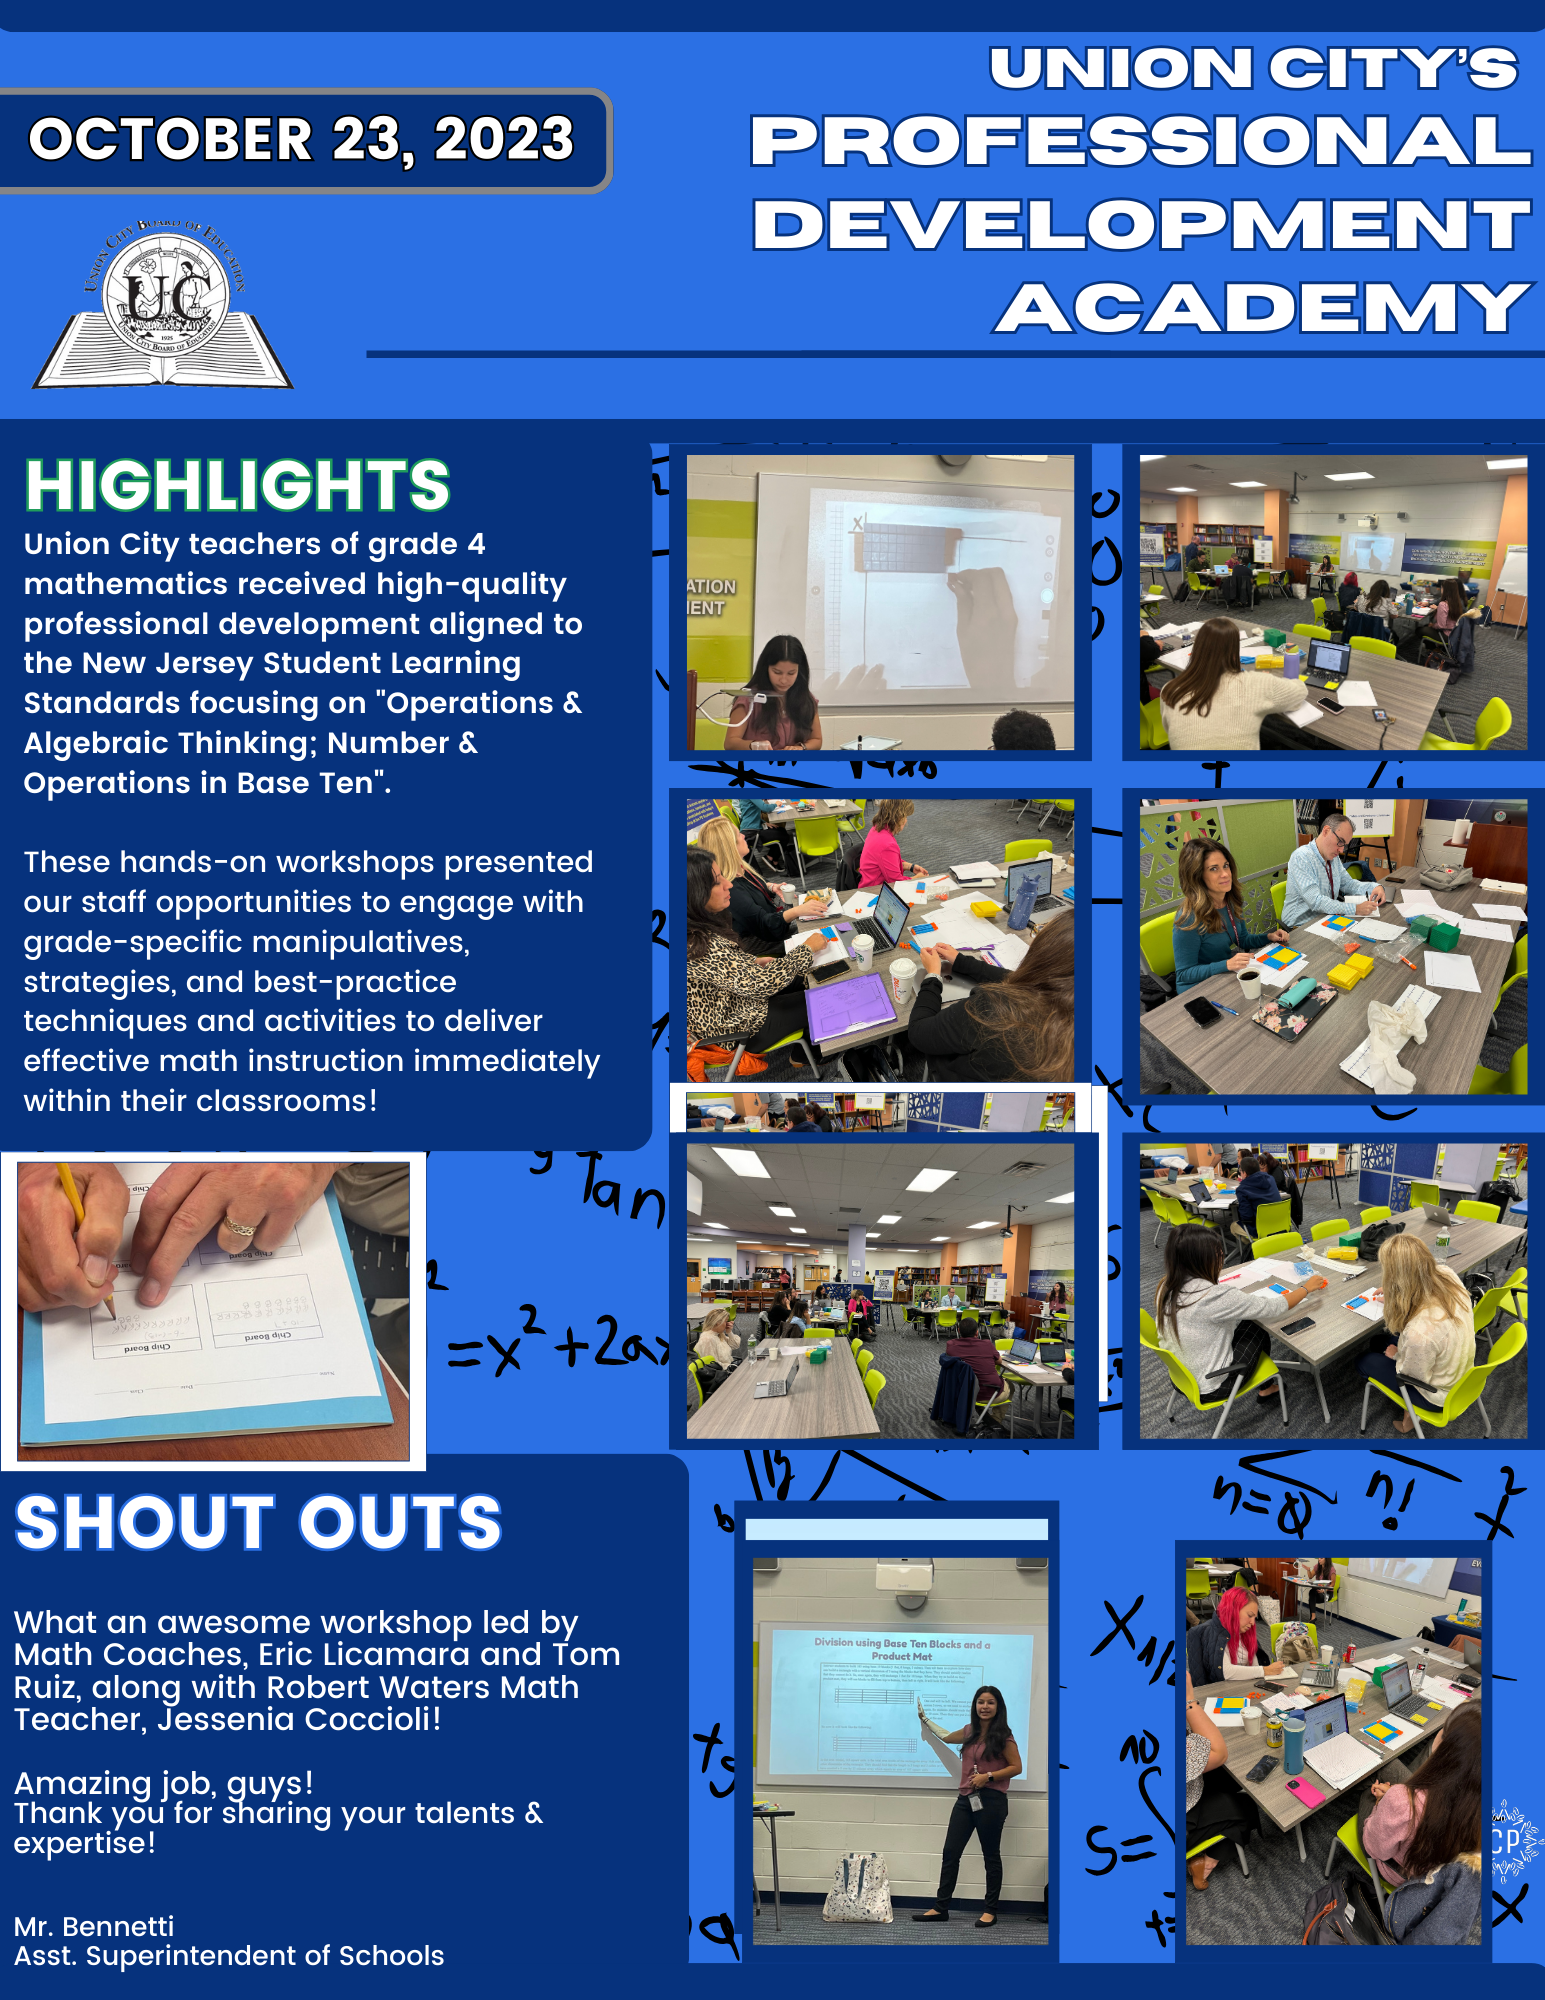 Professional Development Academy in the Union City School District